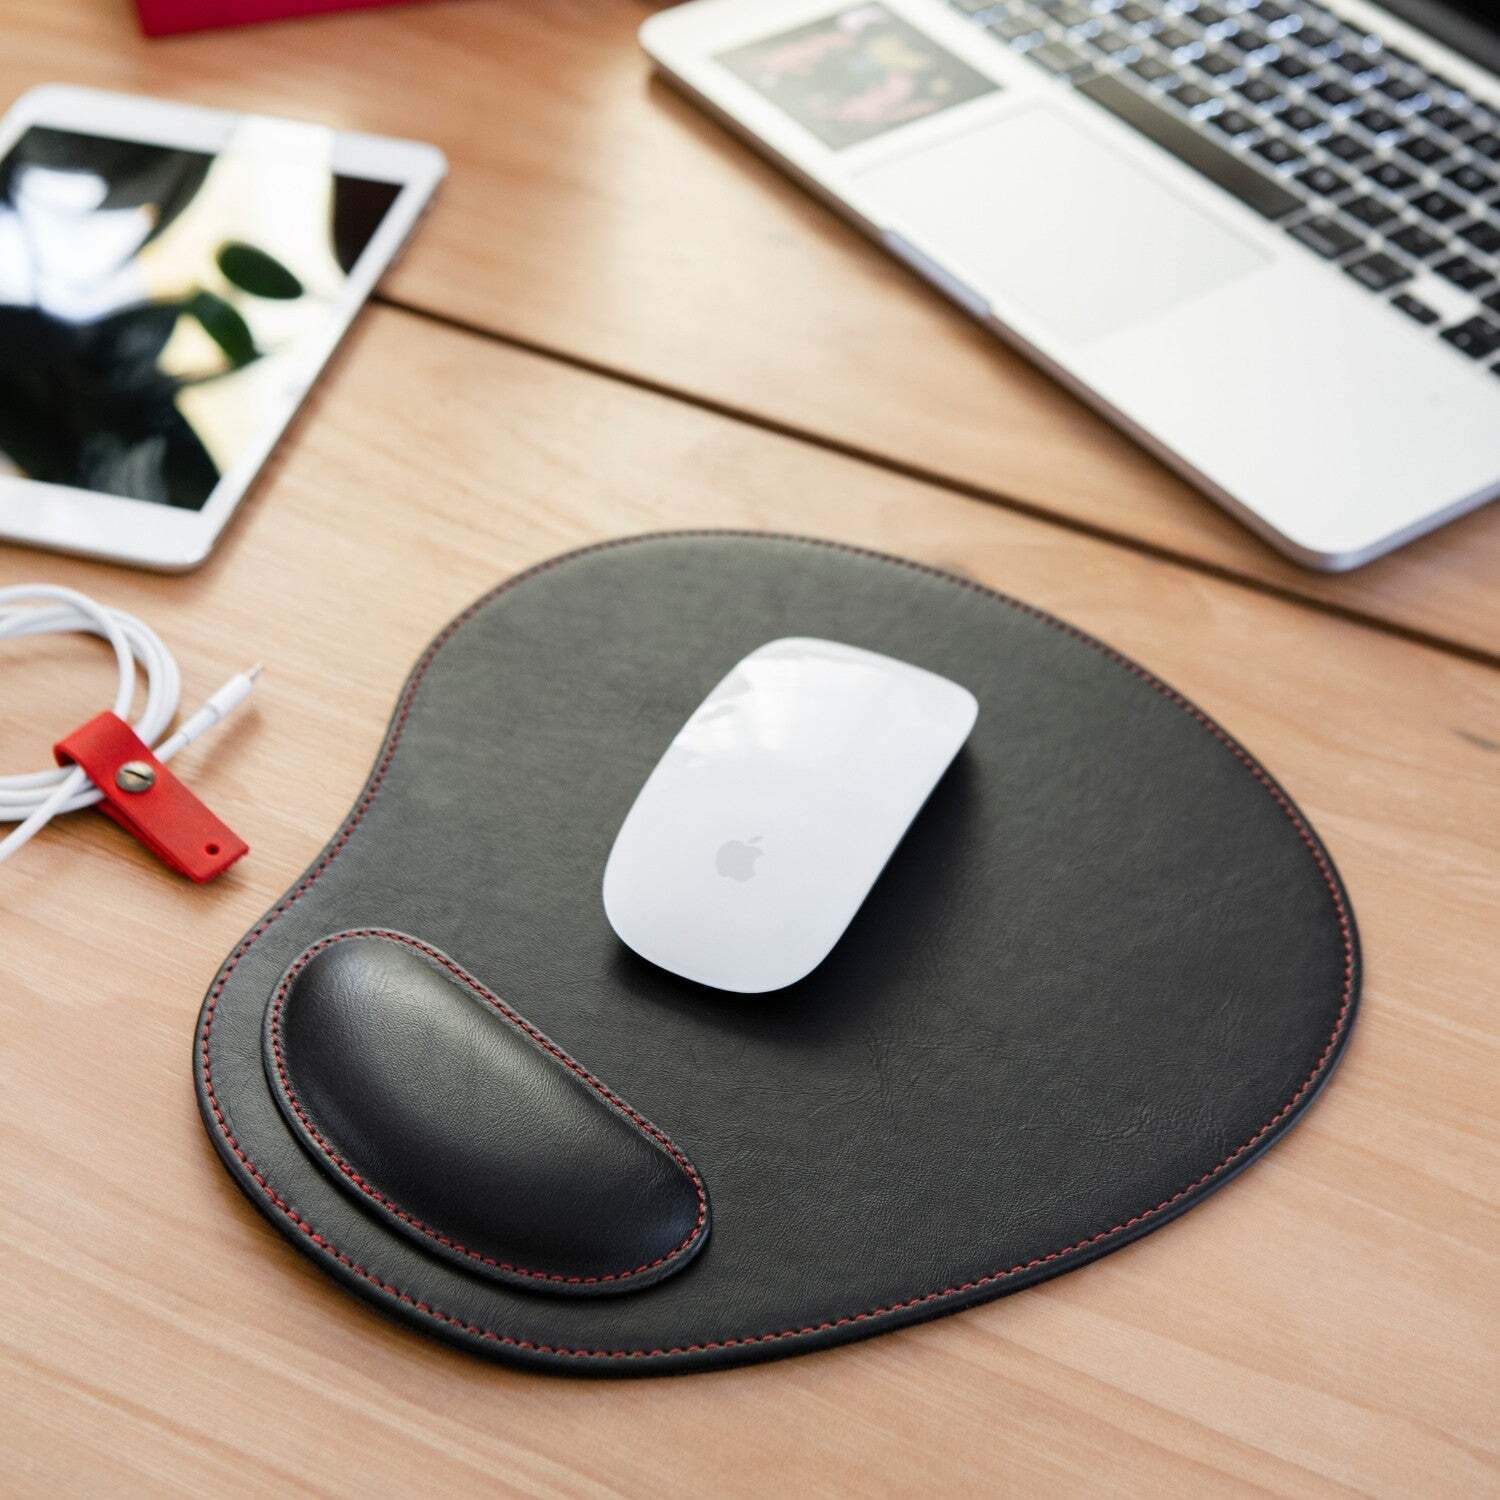 Customized Leather Oval Mouse Pad with Wrist Rest, PU Leather Mousepad